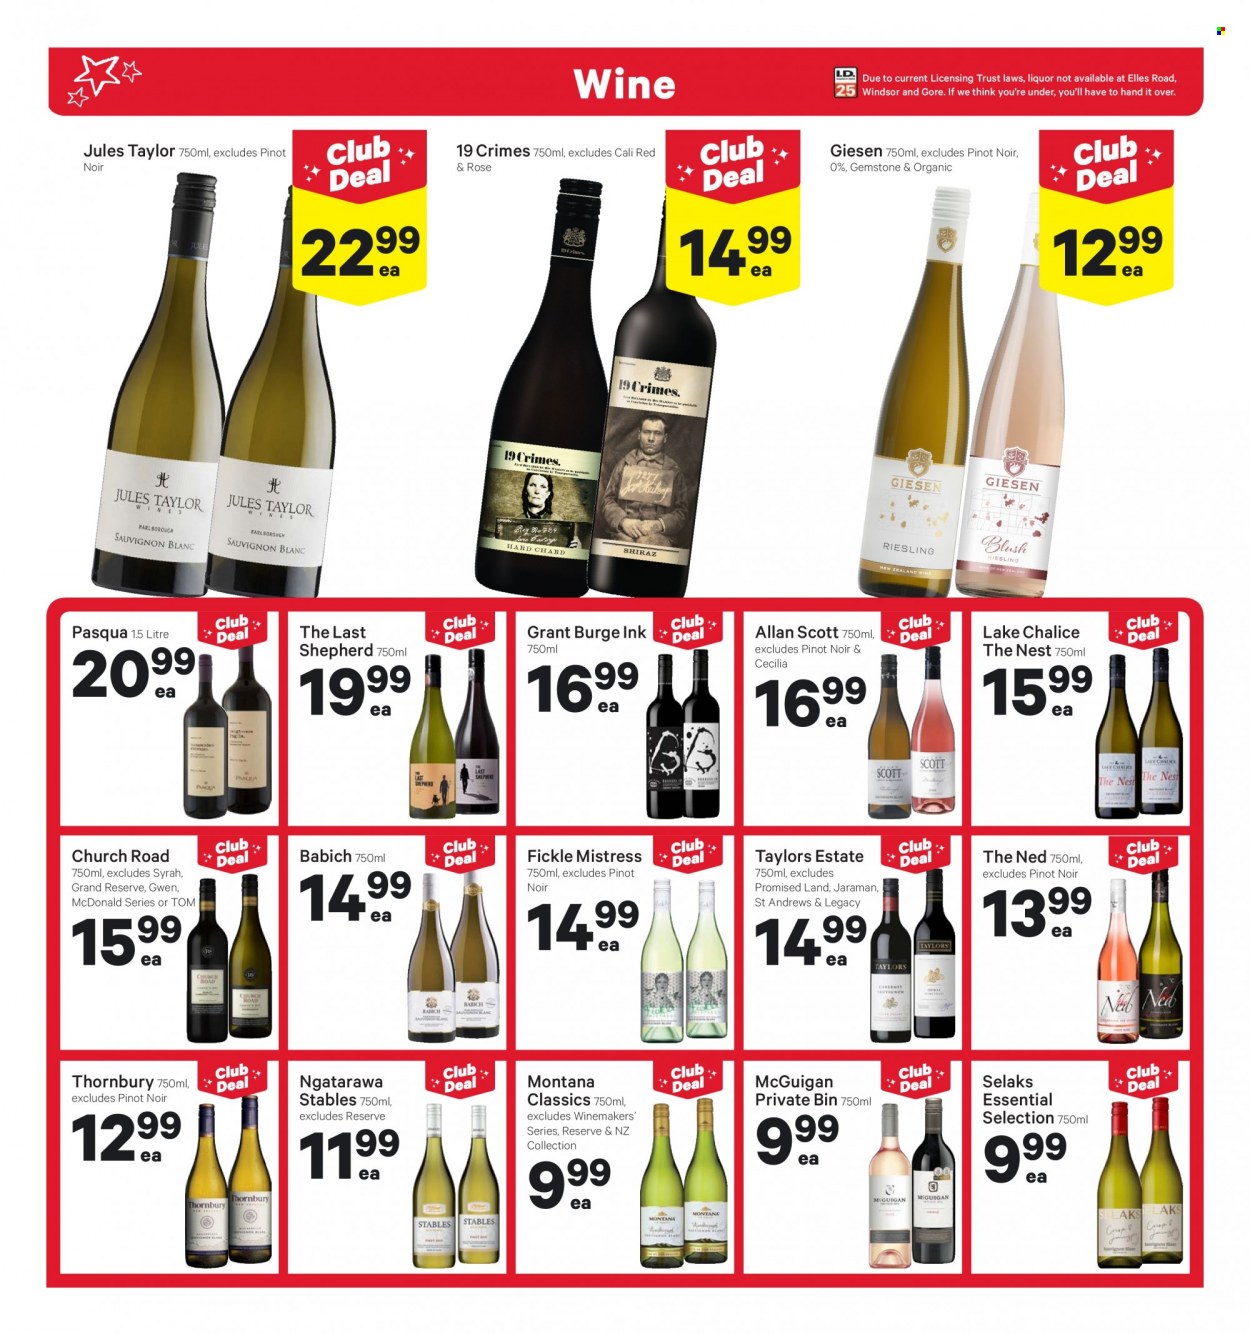 thumbnail - New World mailer - 05.12.2022 - 11.12.2022 - Sales products - red wine, wine, Pinot Noir, Jules Taylor, Syrah, rosé wine, Scott, bin. Page 30.